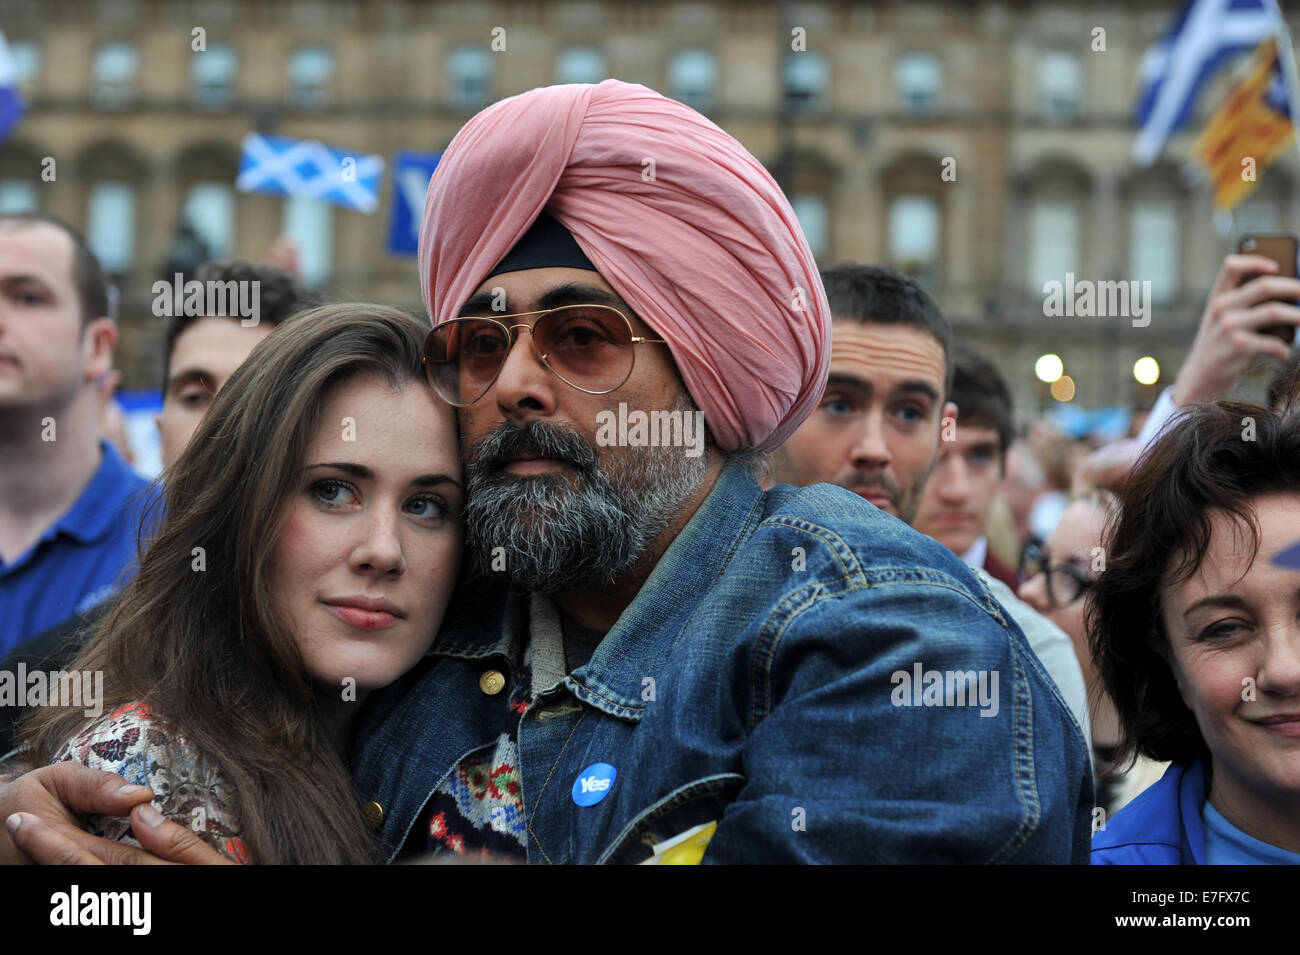 Glasgow, Scotland, UK. 16th September, 2014. Scottish pro-independence rally. Broadcaster and writer Hardeep Singh Kohli amongst Yes crowd at Scottish independence rally in George Square, Glasgow. Credit:  Tony Clerkson/Alamy Live News Stock Photo